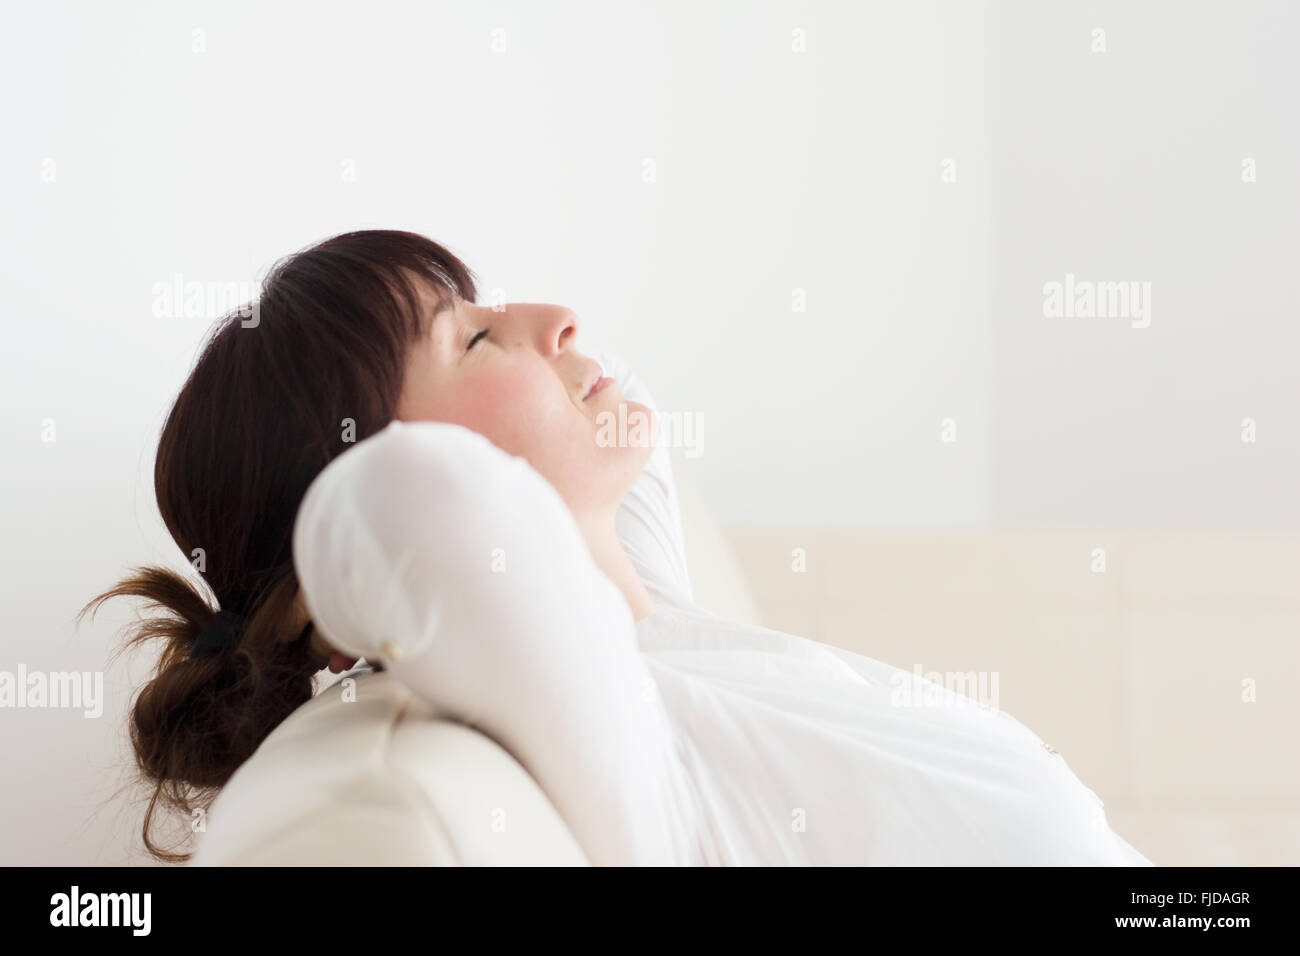 Woman relaxing in her home on a couch with arms behind her neck and closed eyes Stock Photo